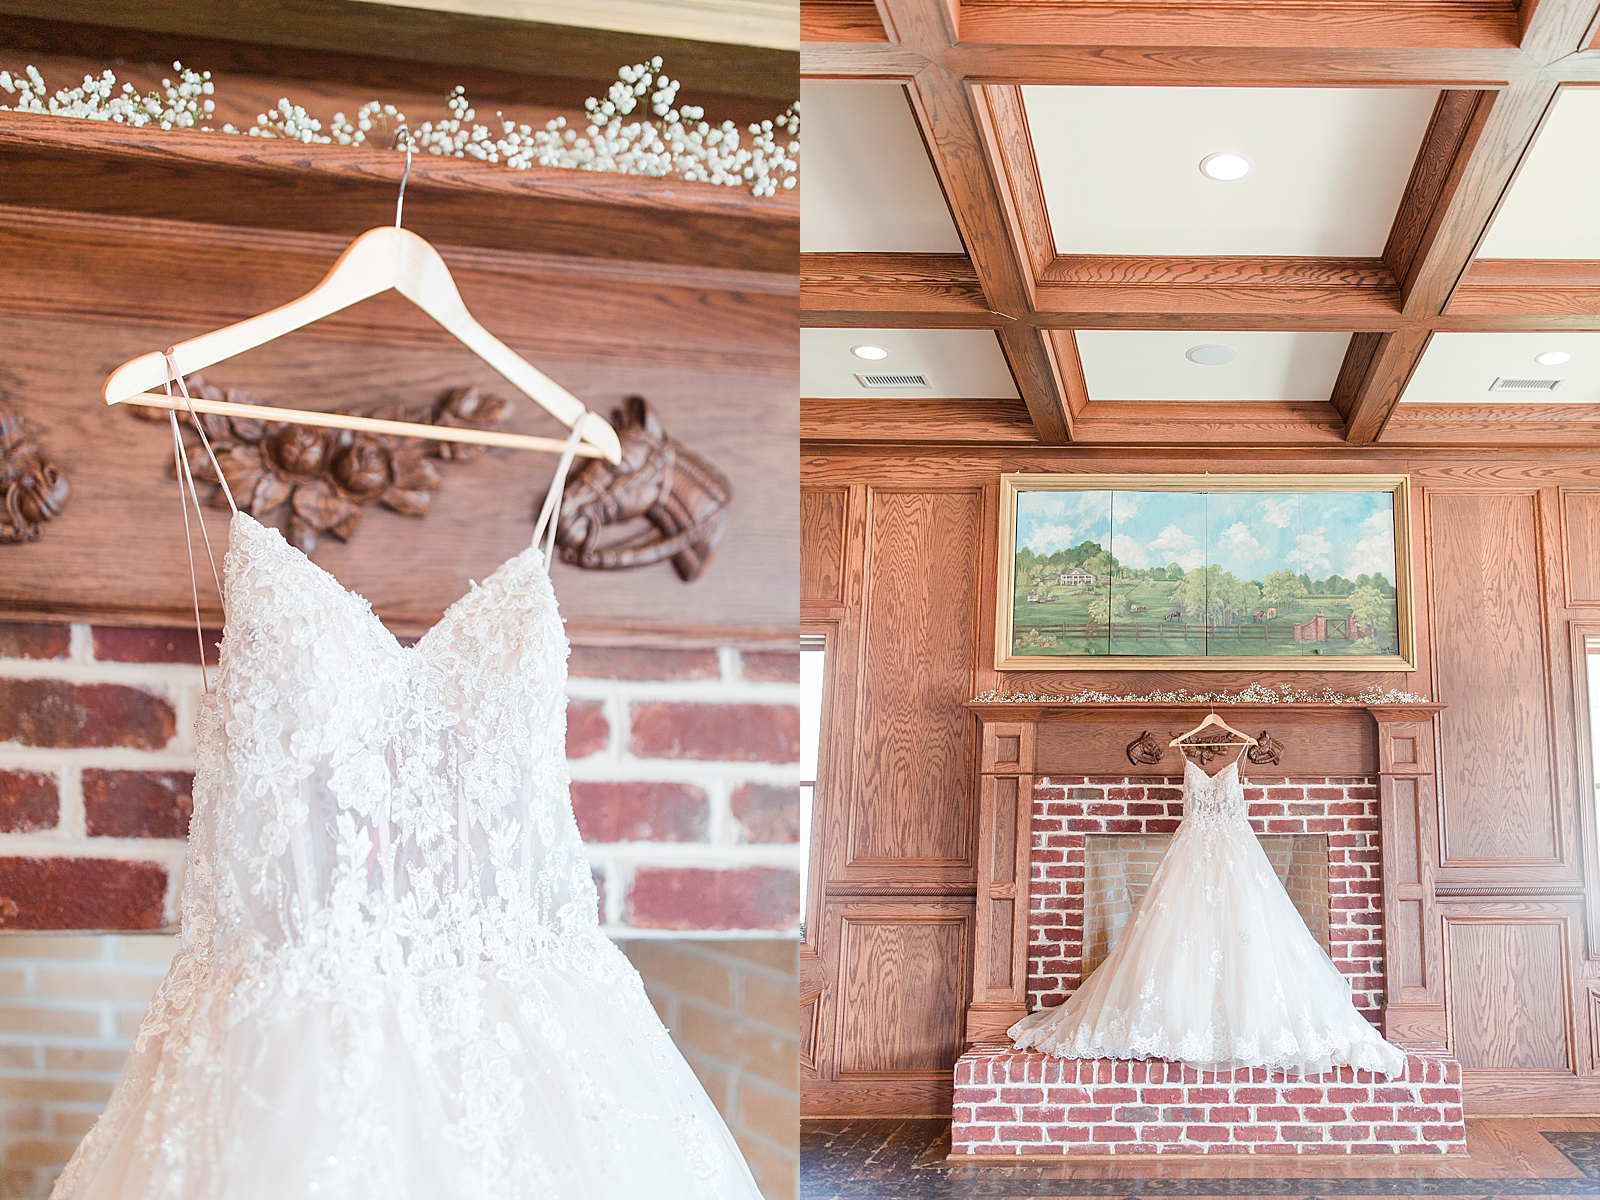 Mooresville Wedding Details of Brides Dress hanging on fireplace Photos